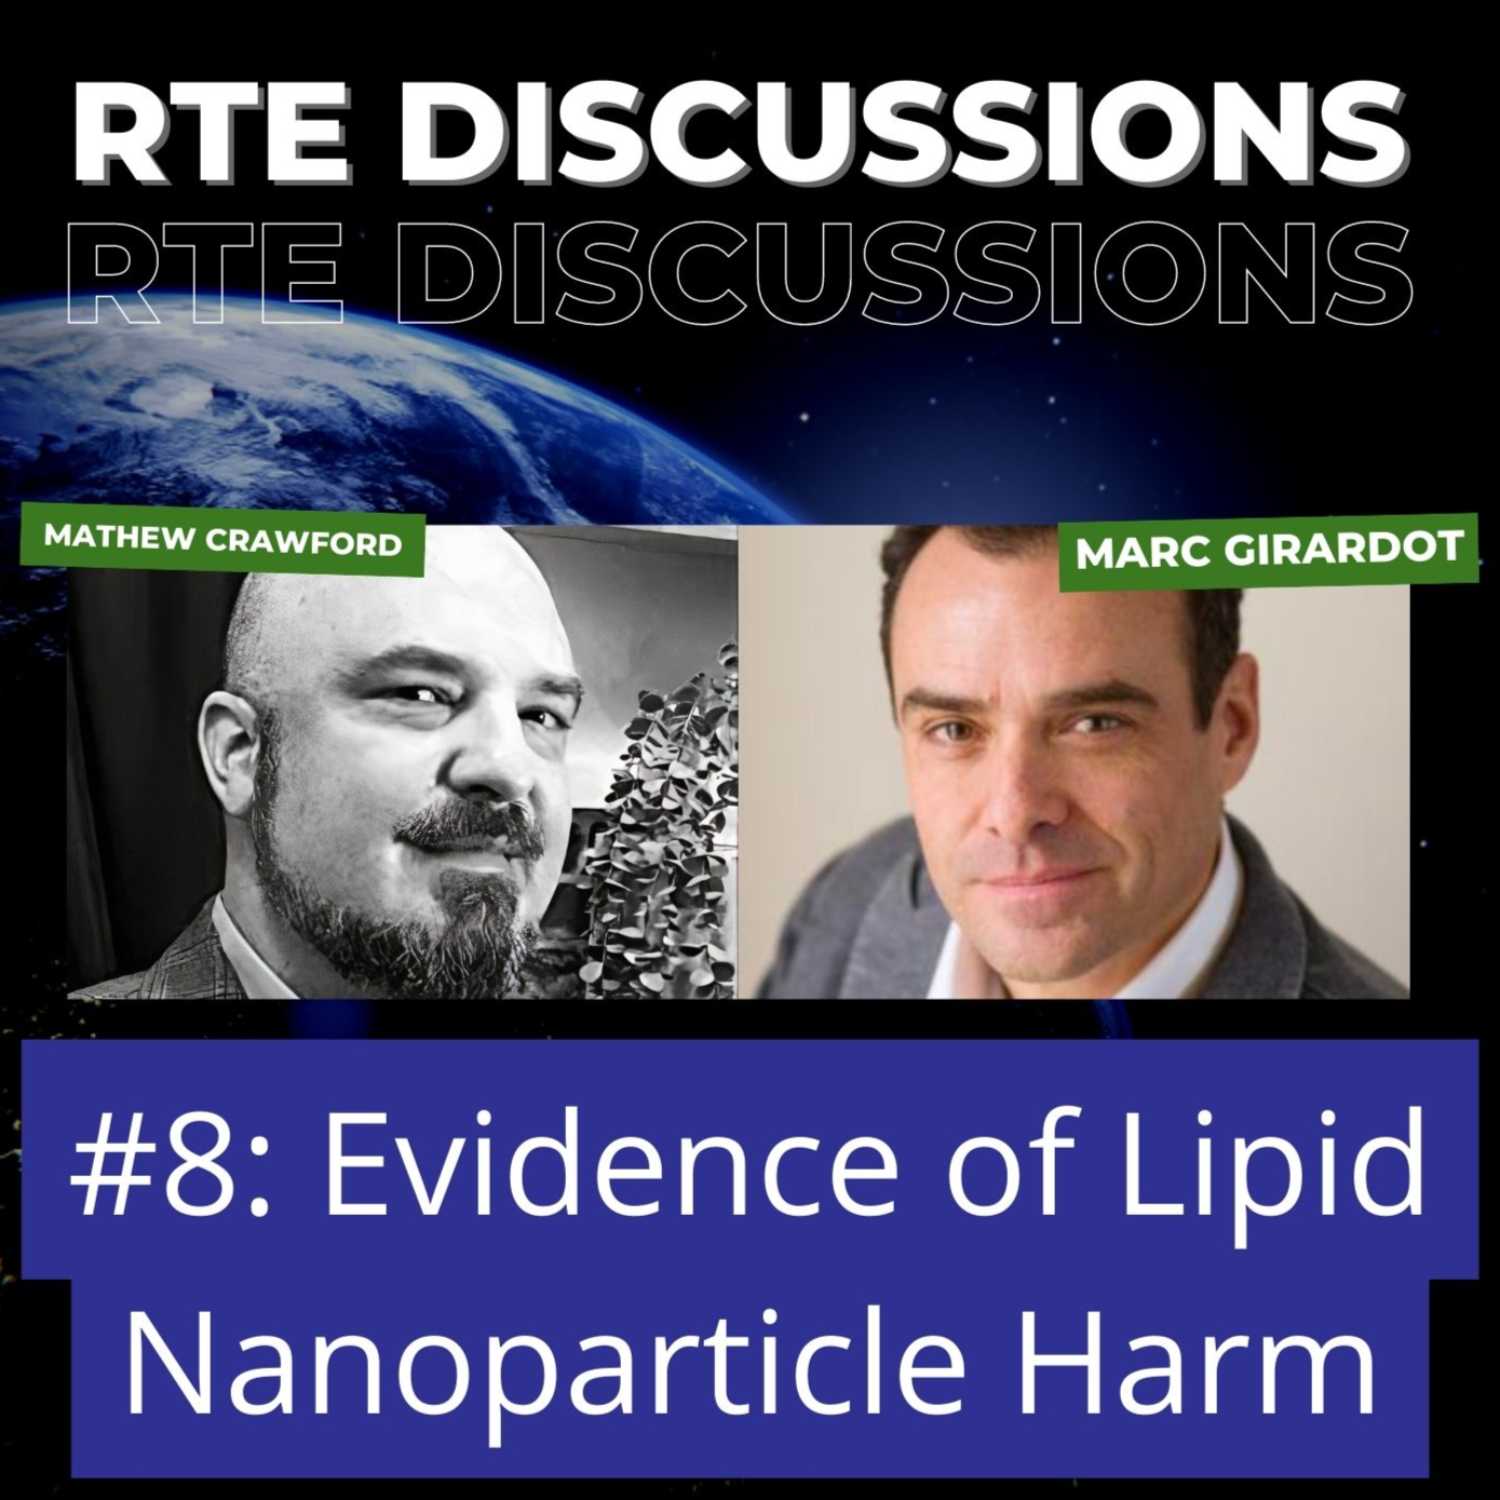 RTE Discussions #8: Evidence of Lipid Nanoparticle Harm With Marc Girardot